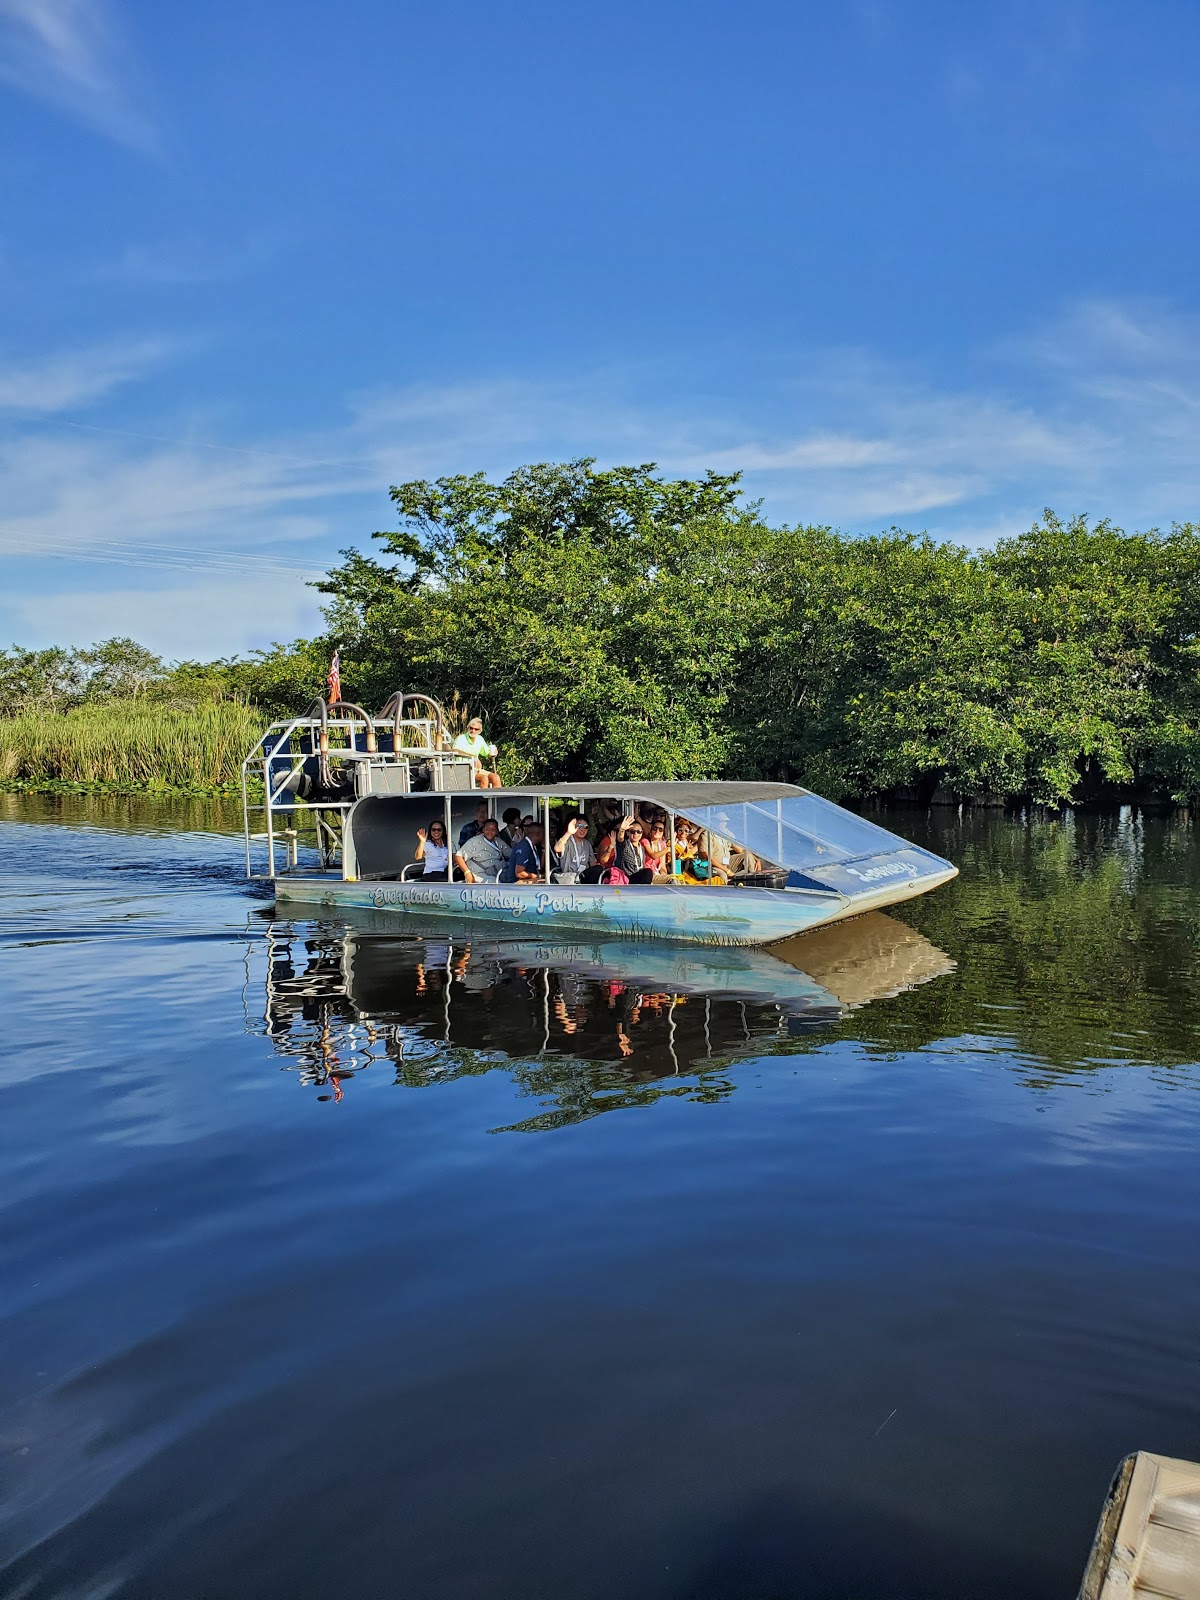 Everglades Airboat Tours & Animal Encounters | Everglades Holiday Park ...